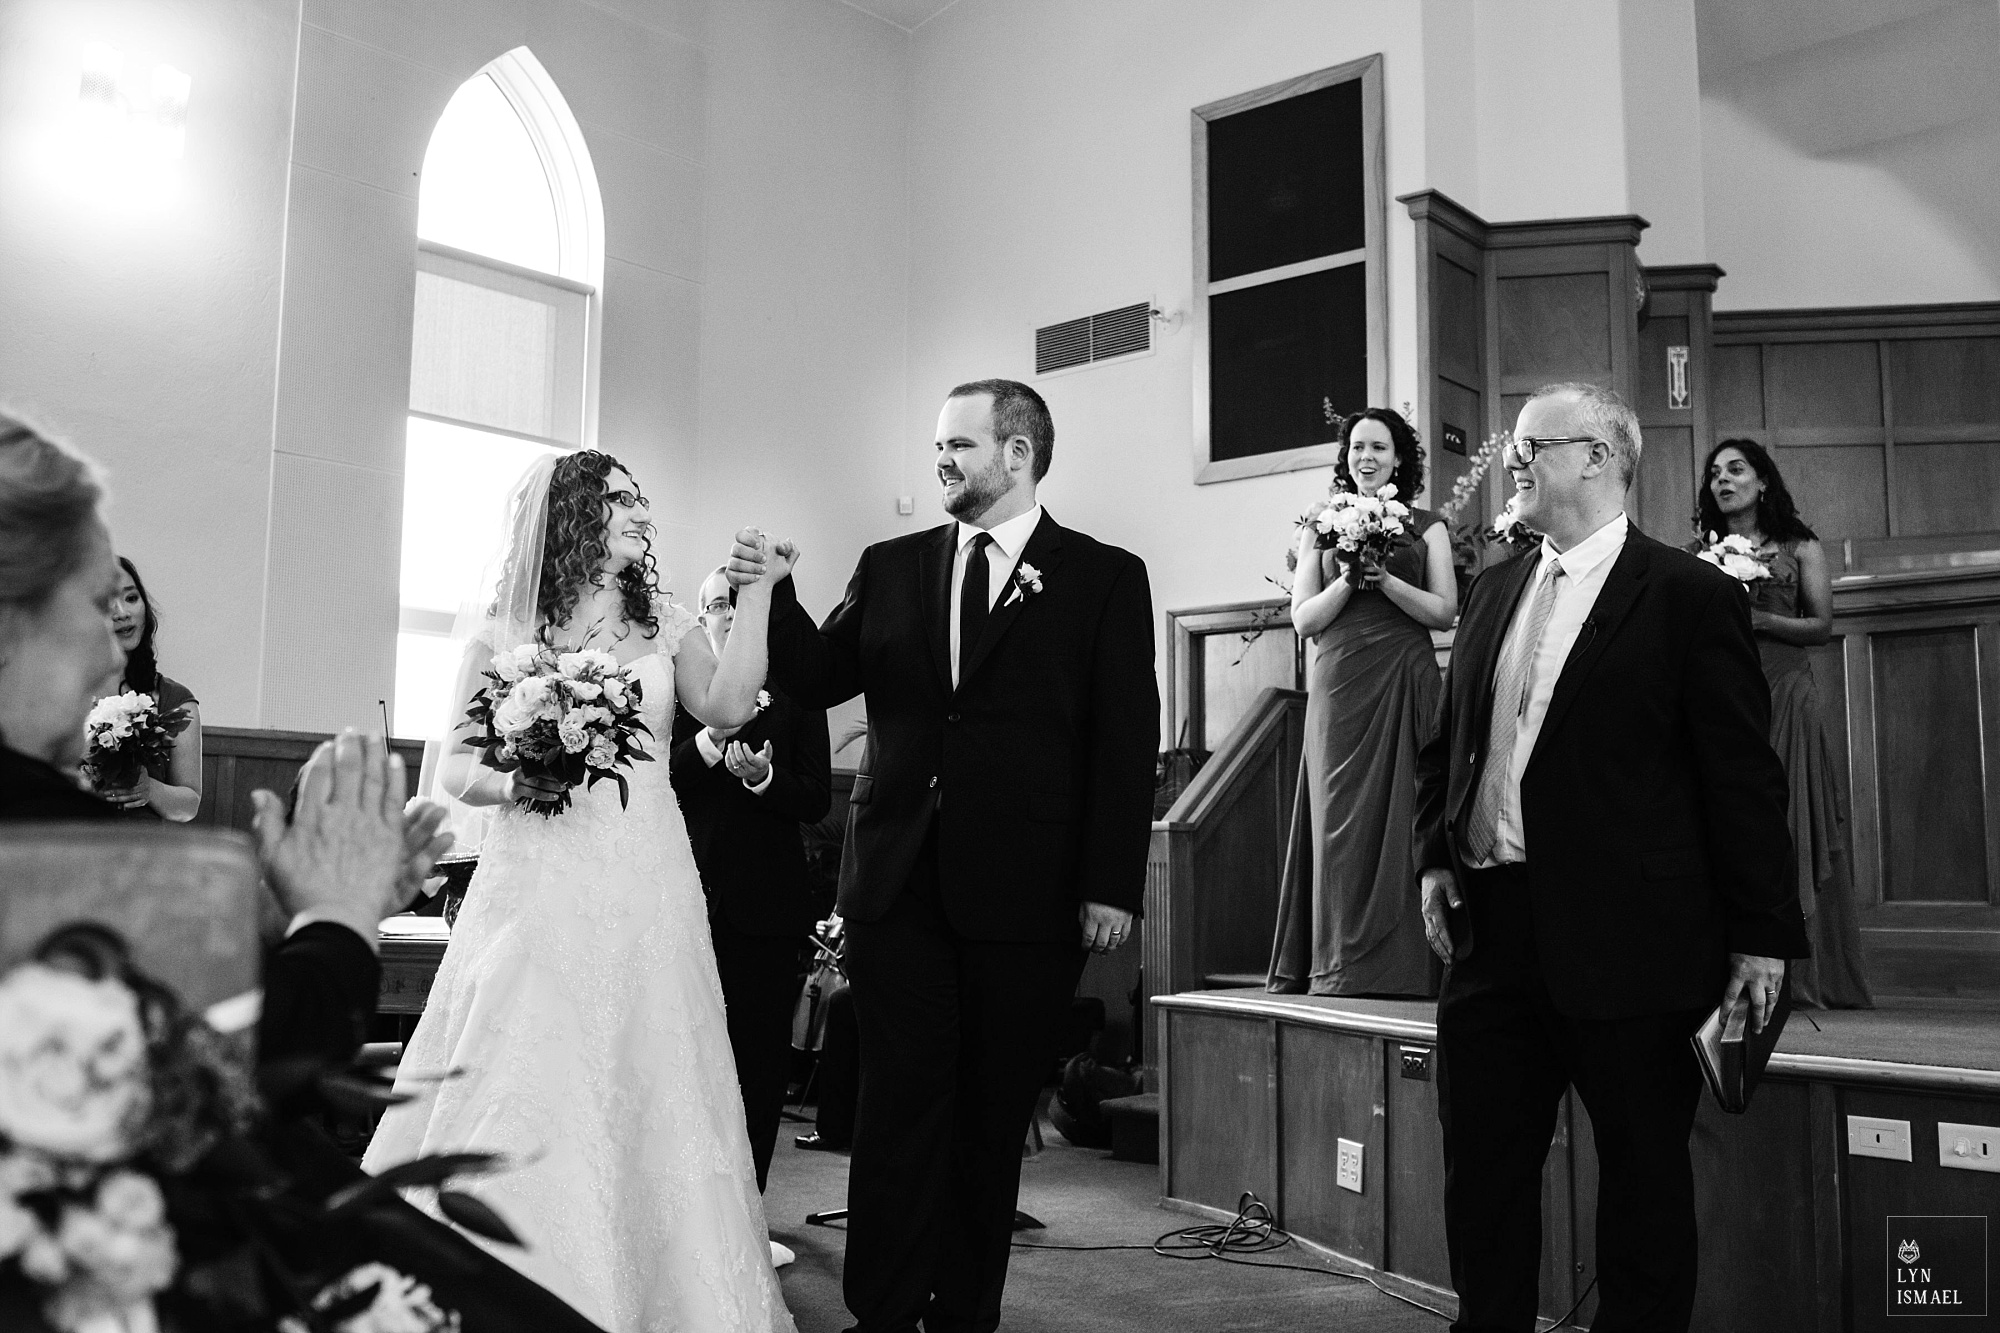 Bride and groom announced as newlyweds at the Kitchener Mennonite Brethren Church